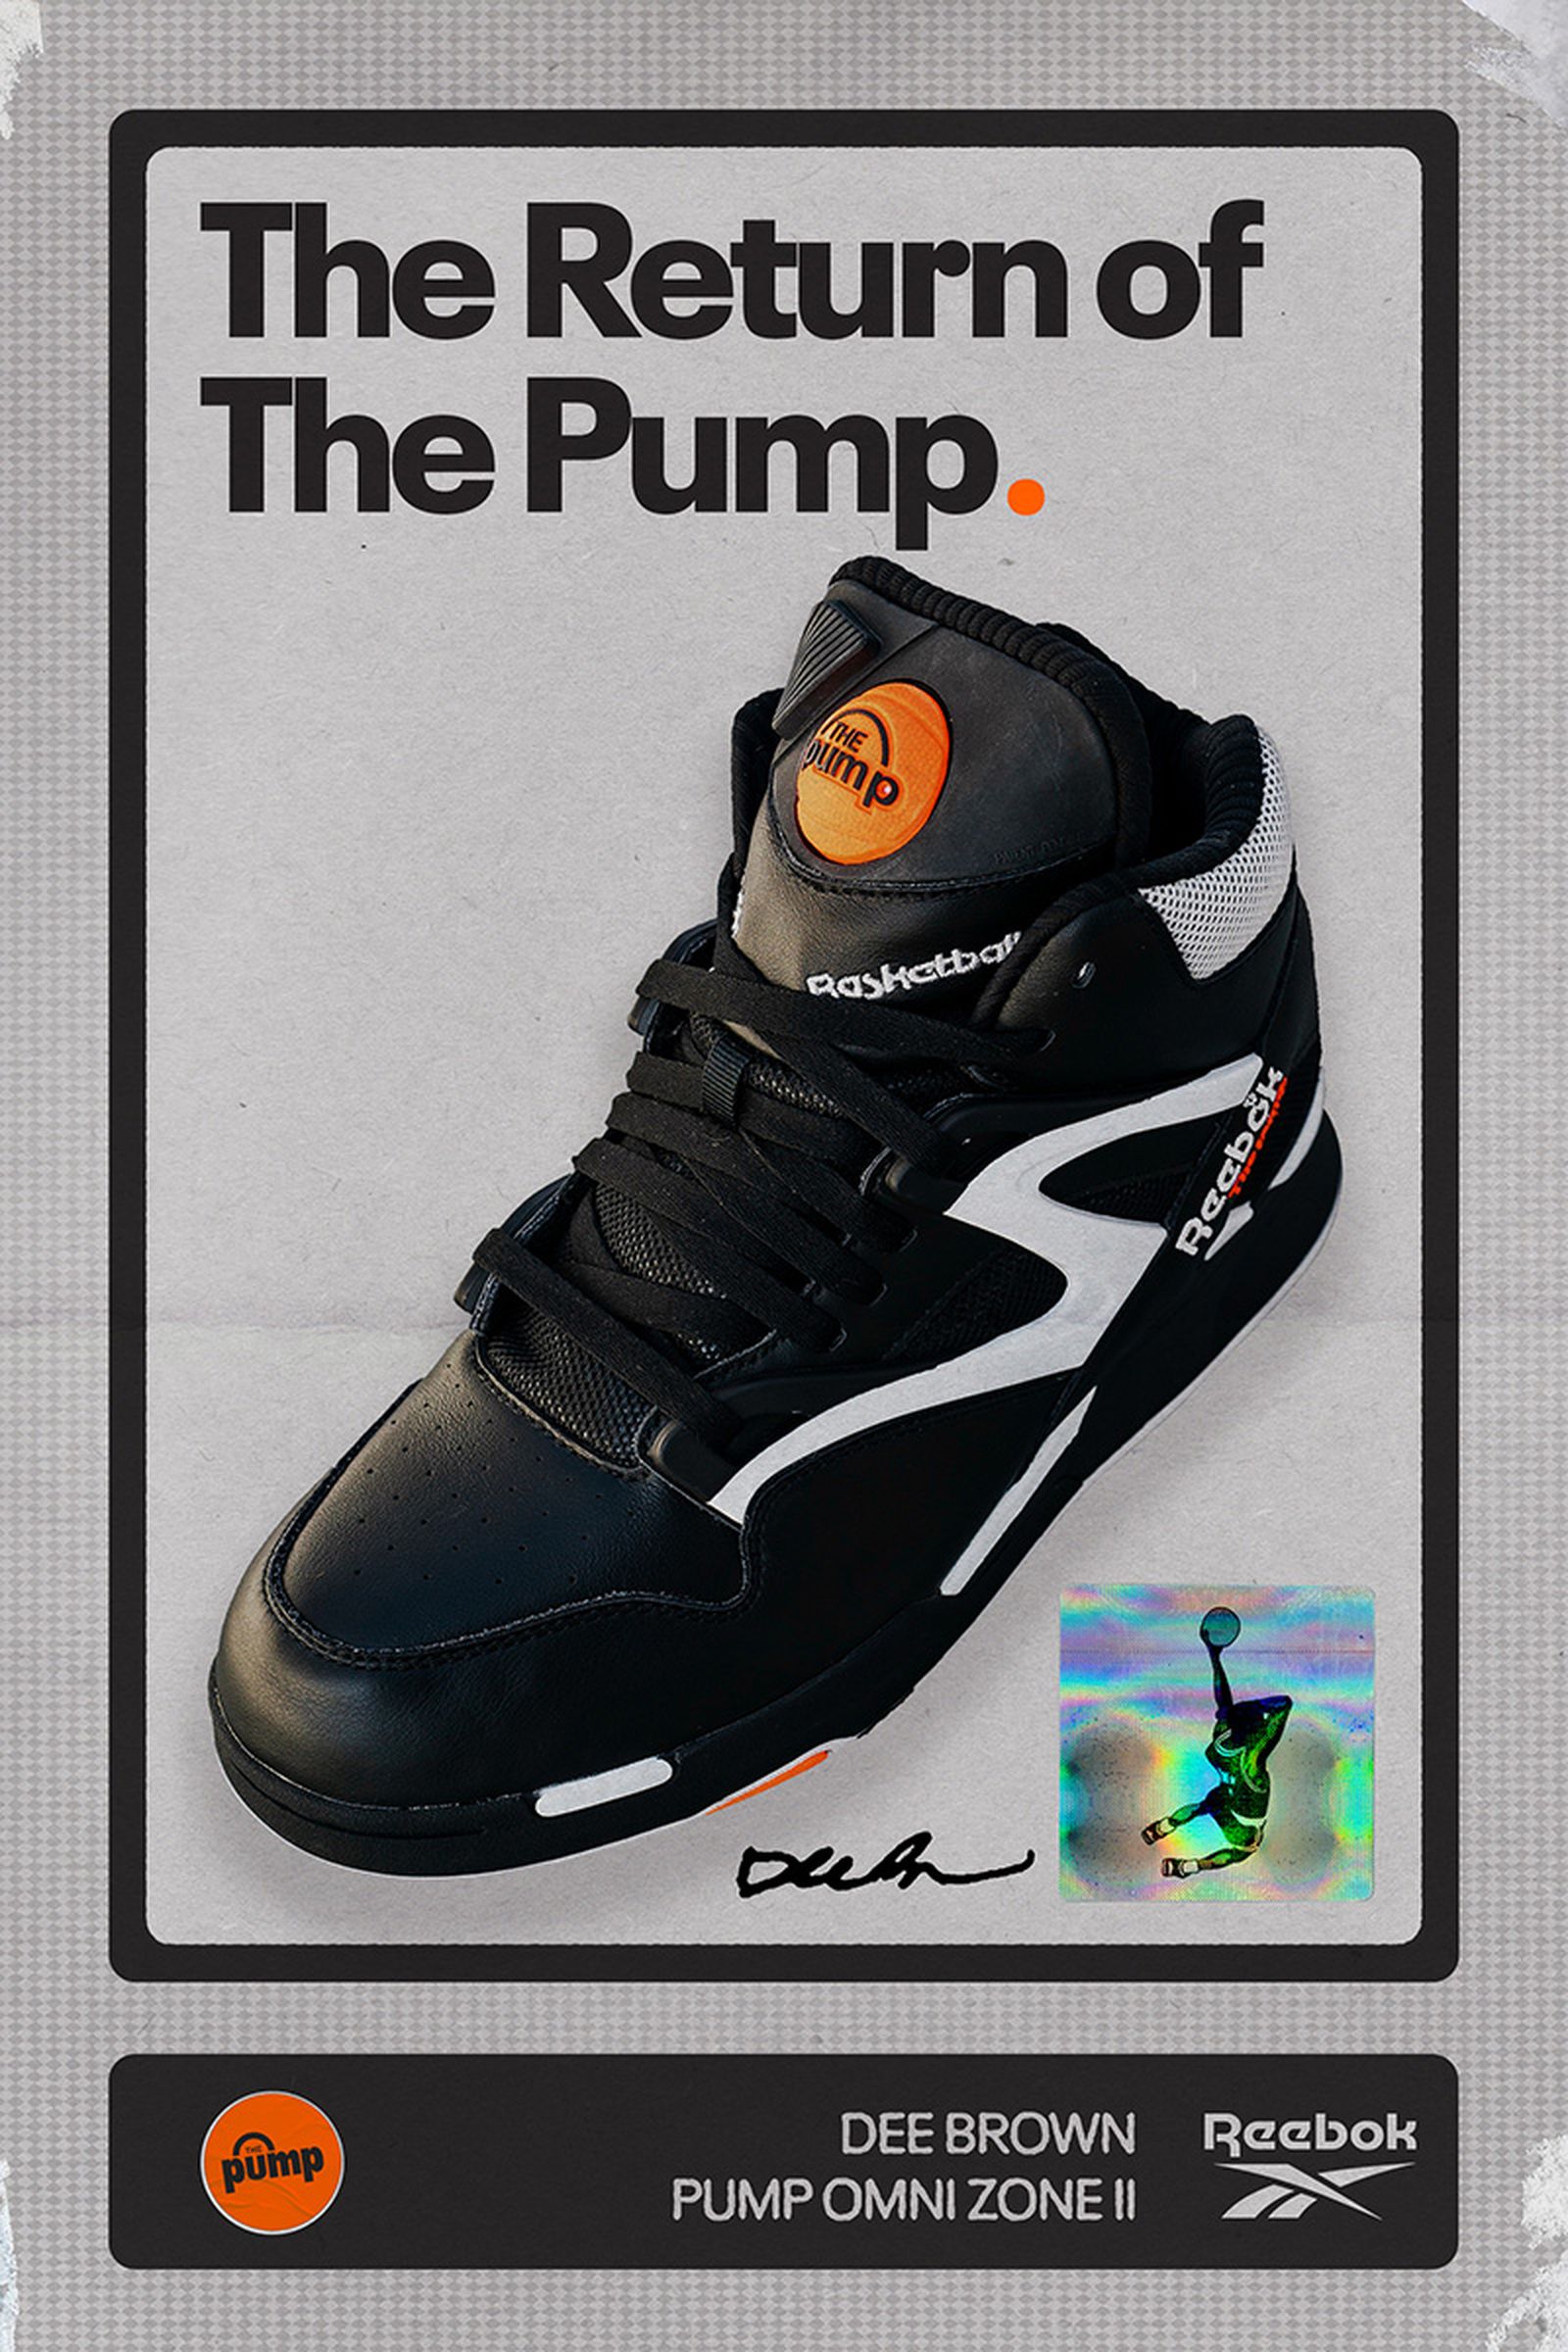 The Moment Reebok PUMP Became